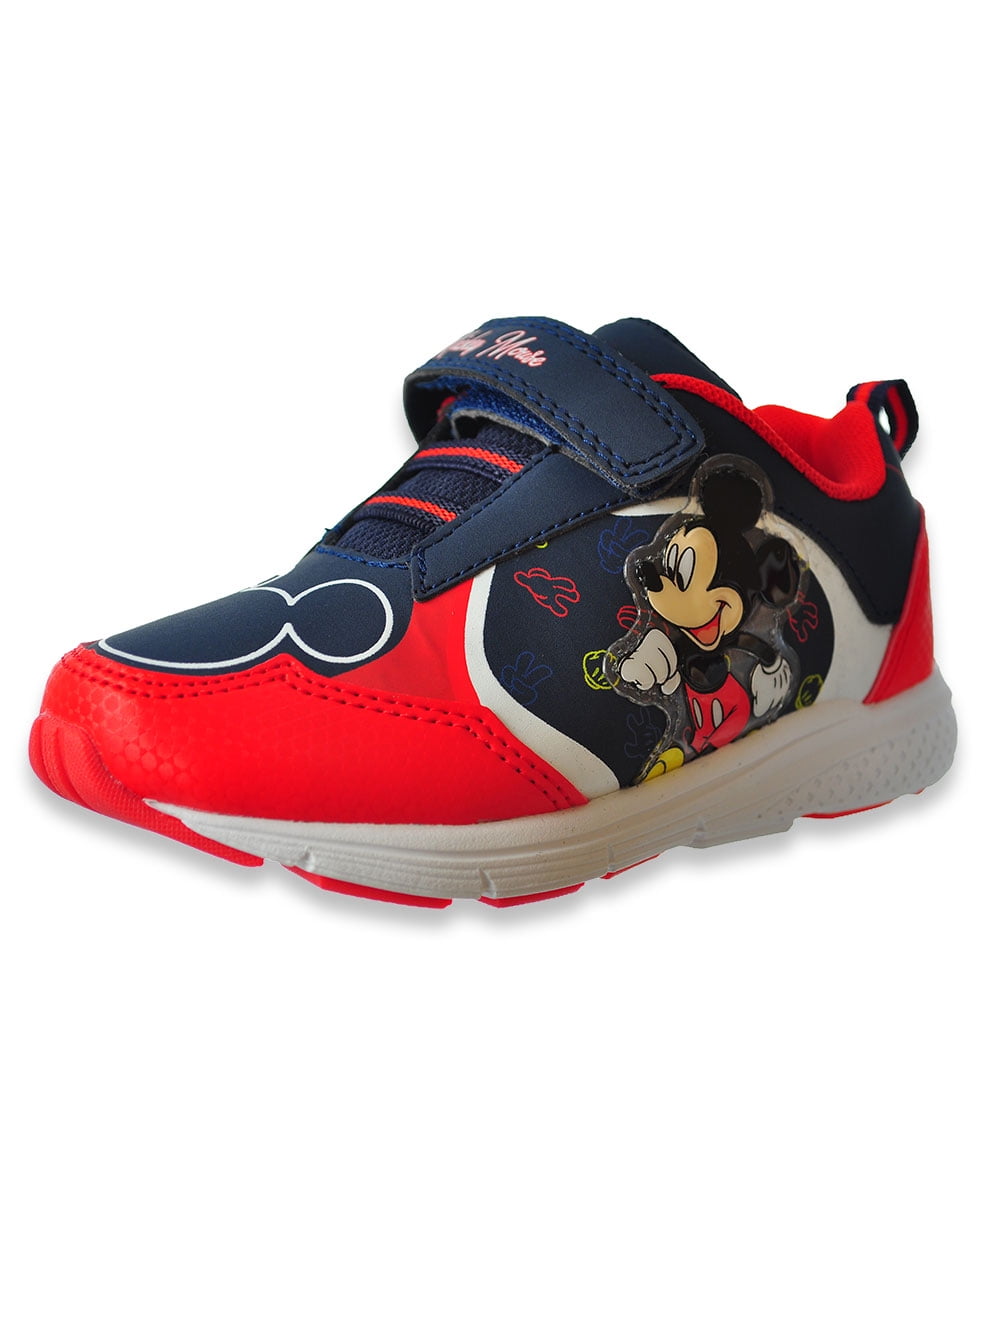 Mickey Mouse LED light up shoes for kids